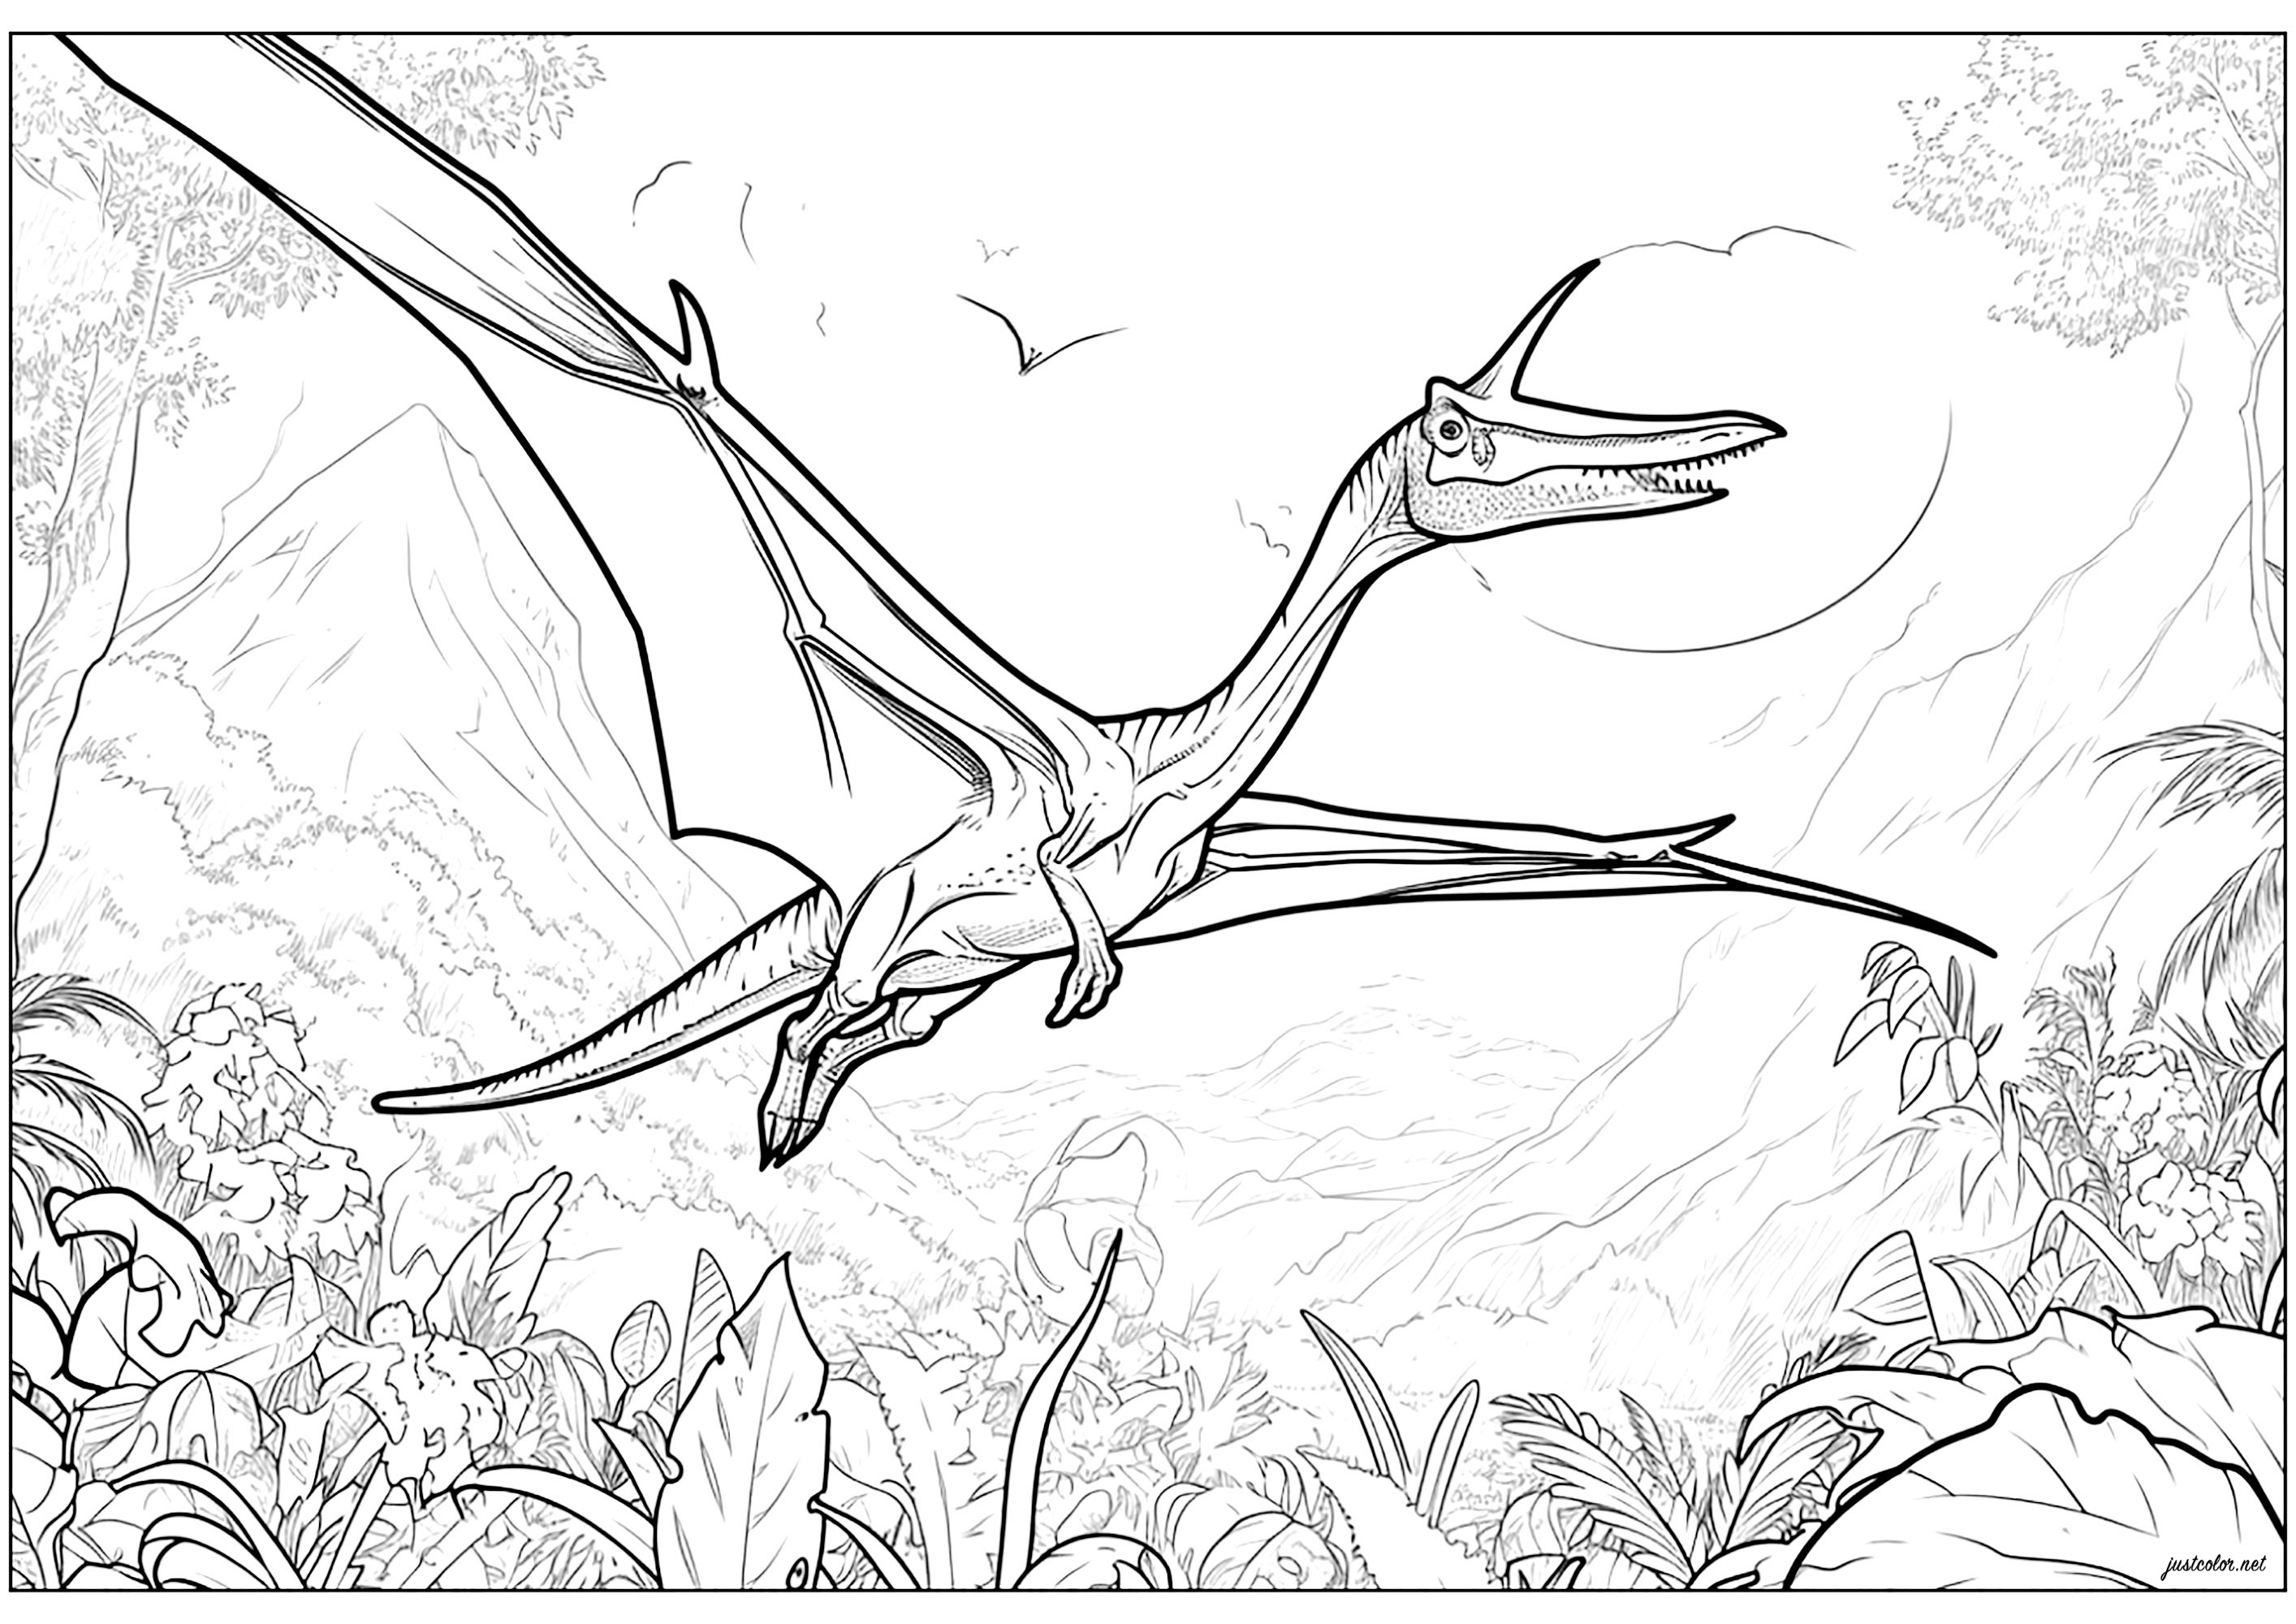 Coloring page : Dinosaurs - 6